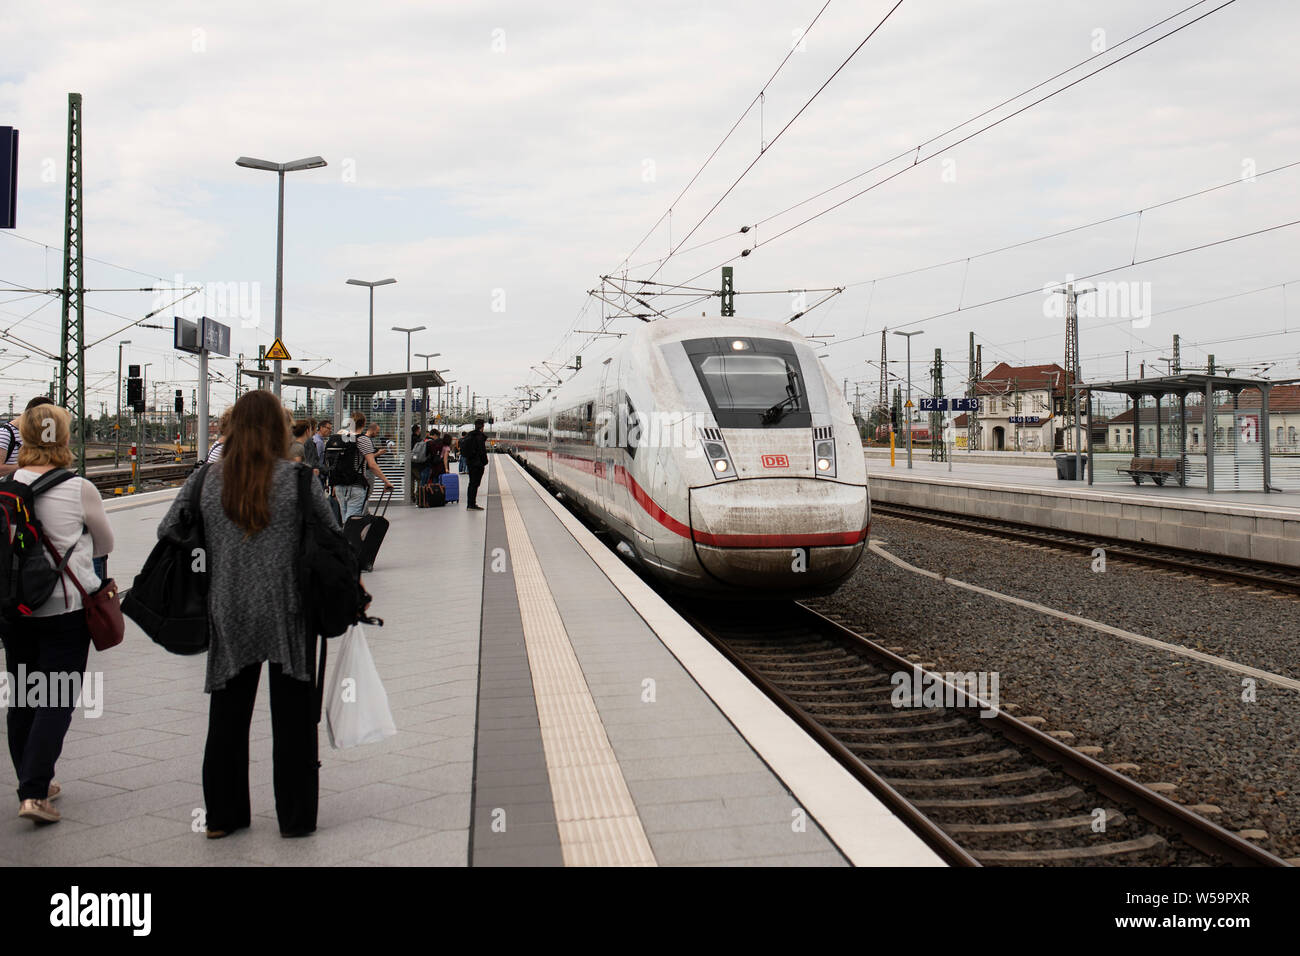 An ICE Intercity Express high speed train on the platform at the Hauptbahnhof (main train station) in Leipzig, Germany. Stock Photo